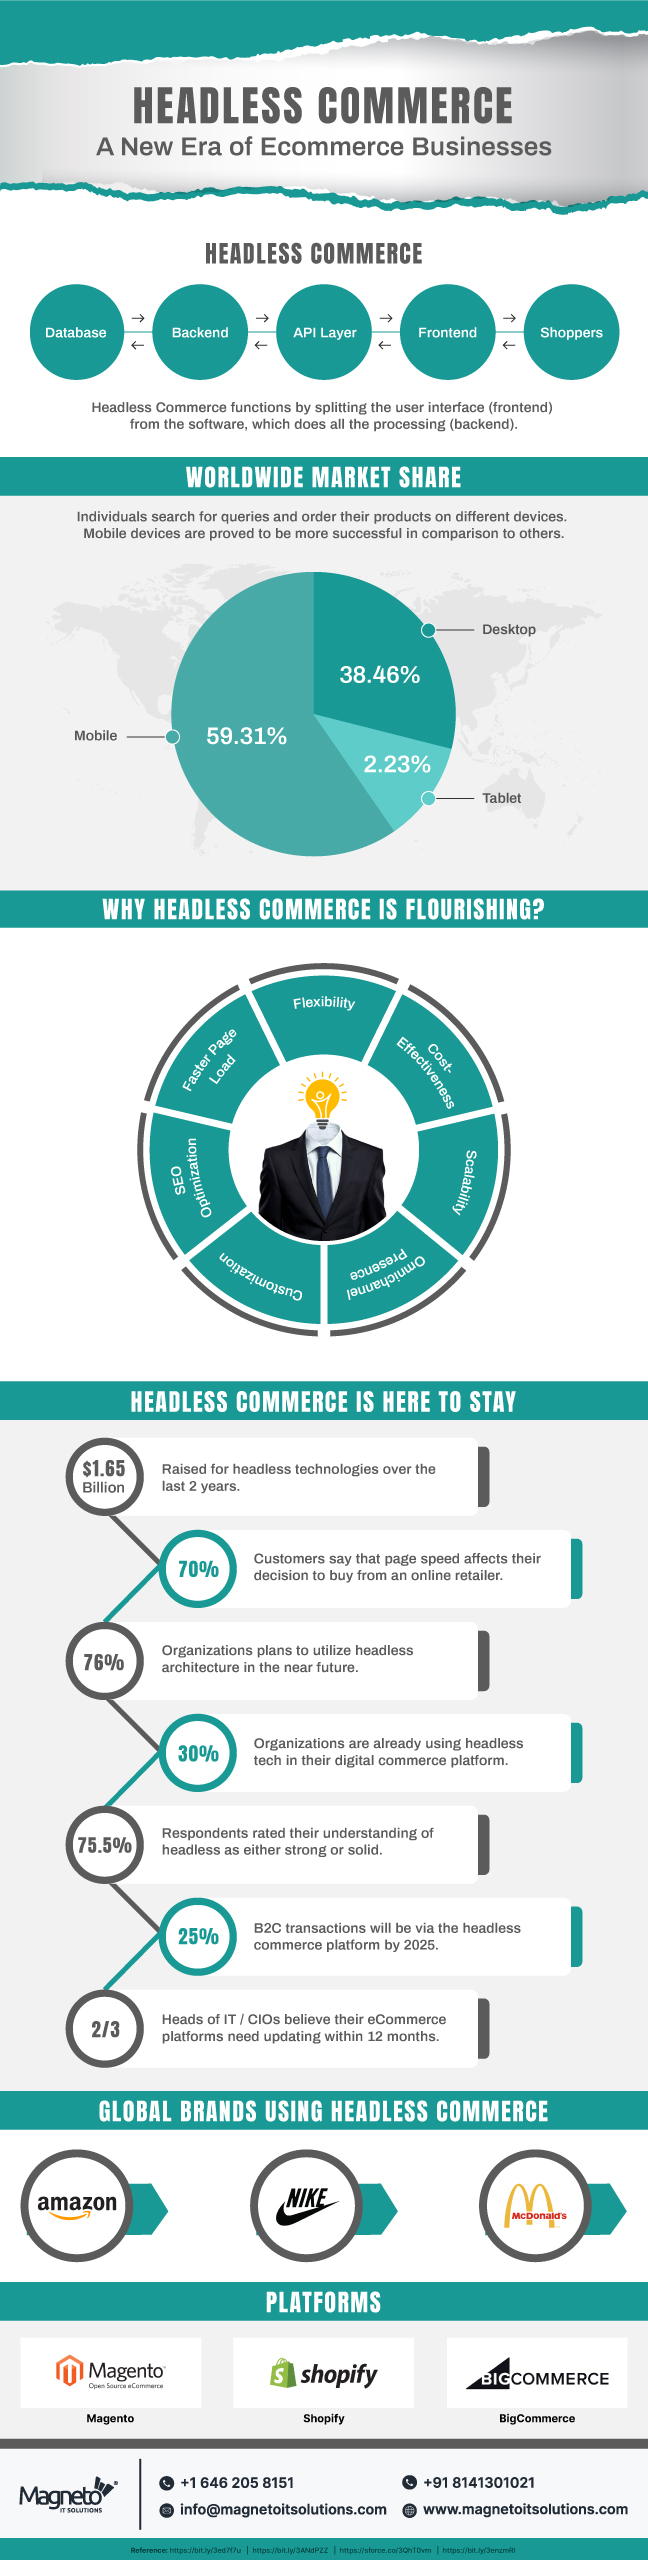 Headless Commerce-A New Era of Ecommerce Businesses-Infographic